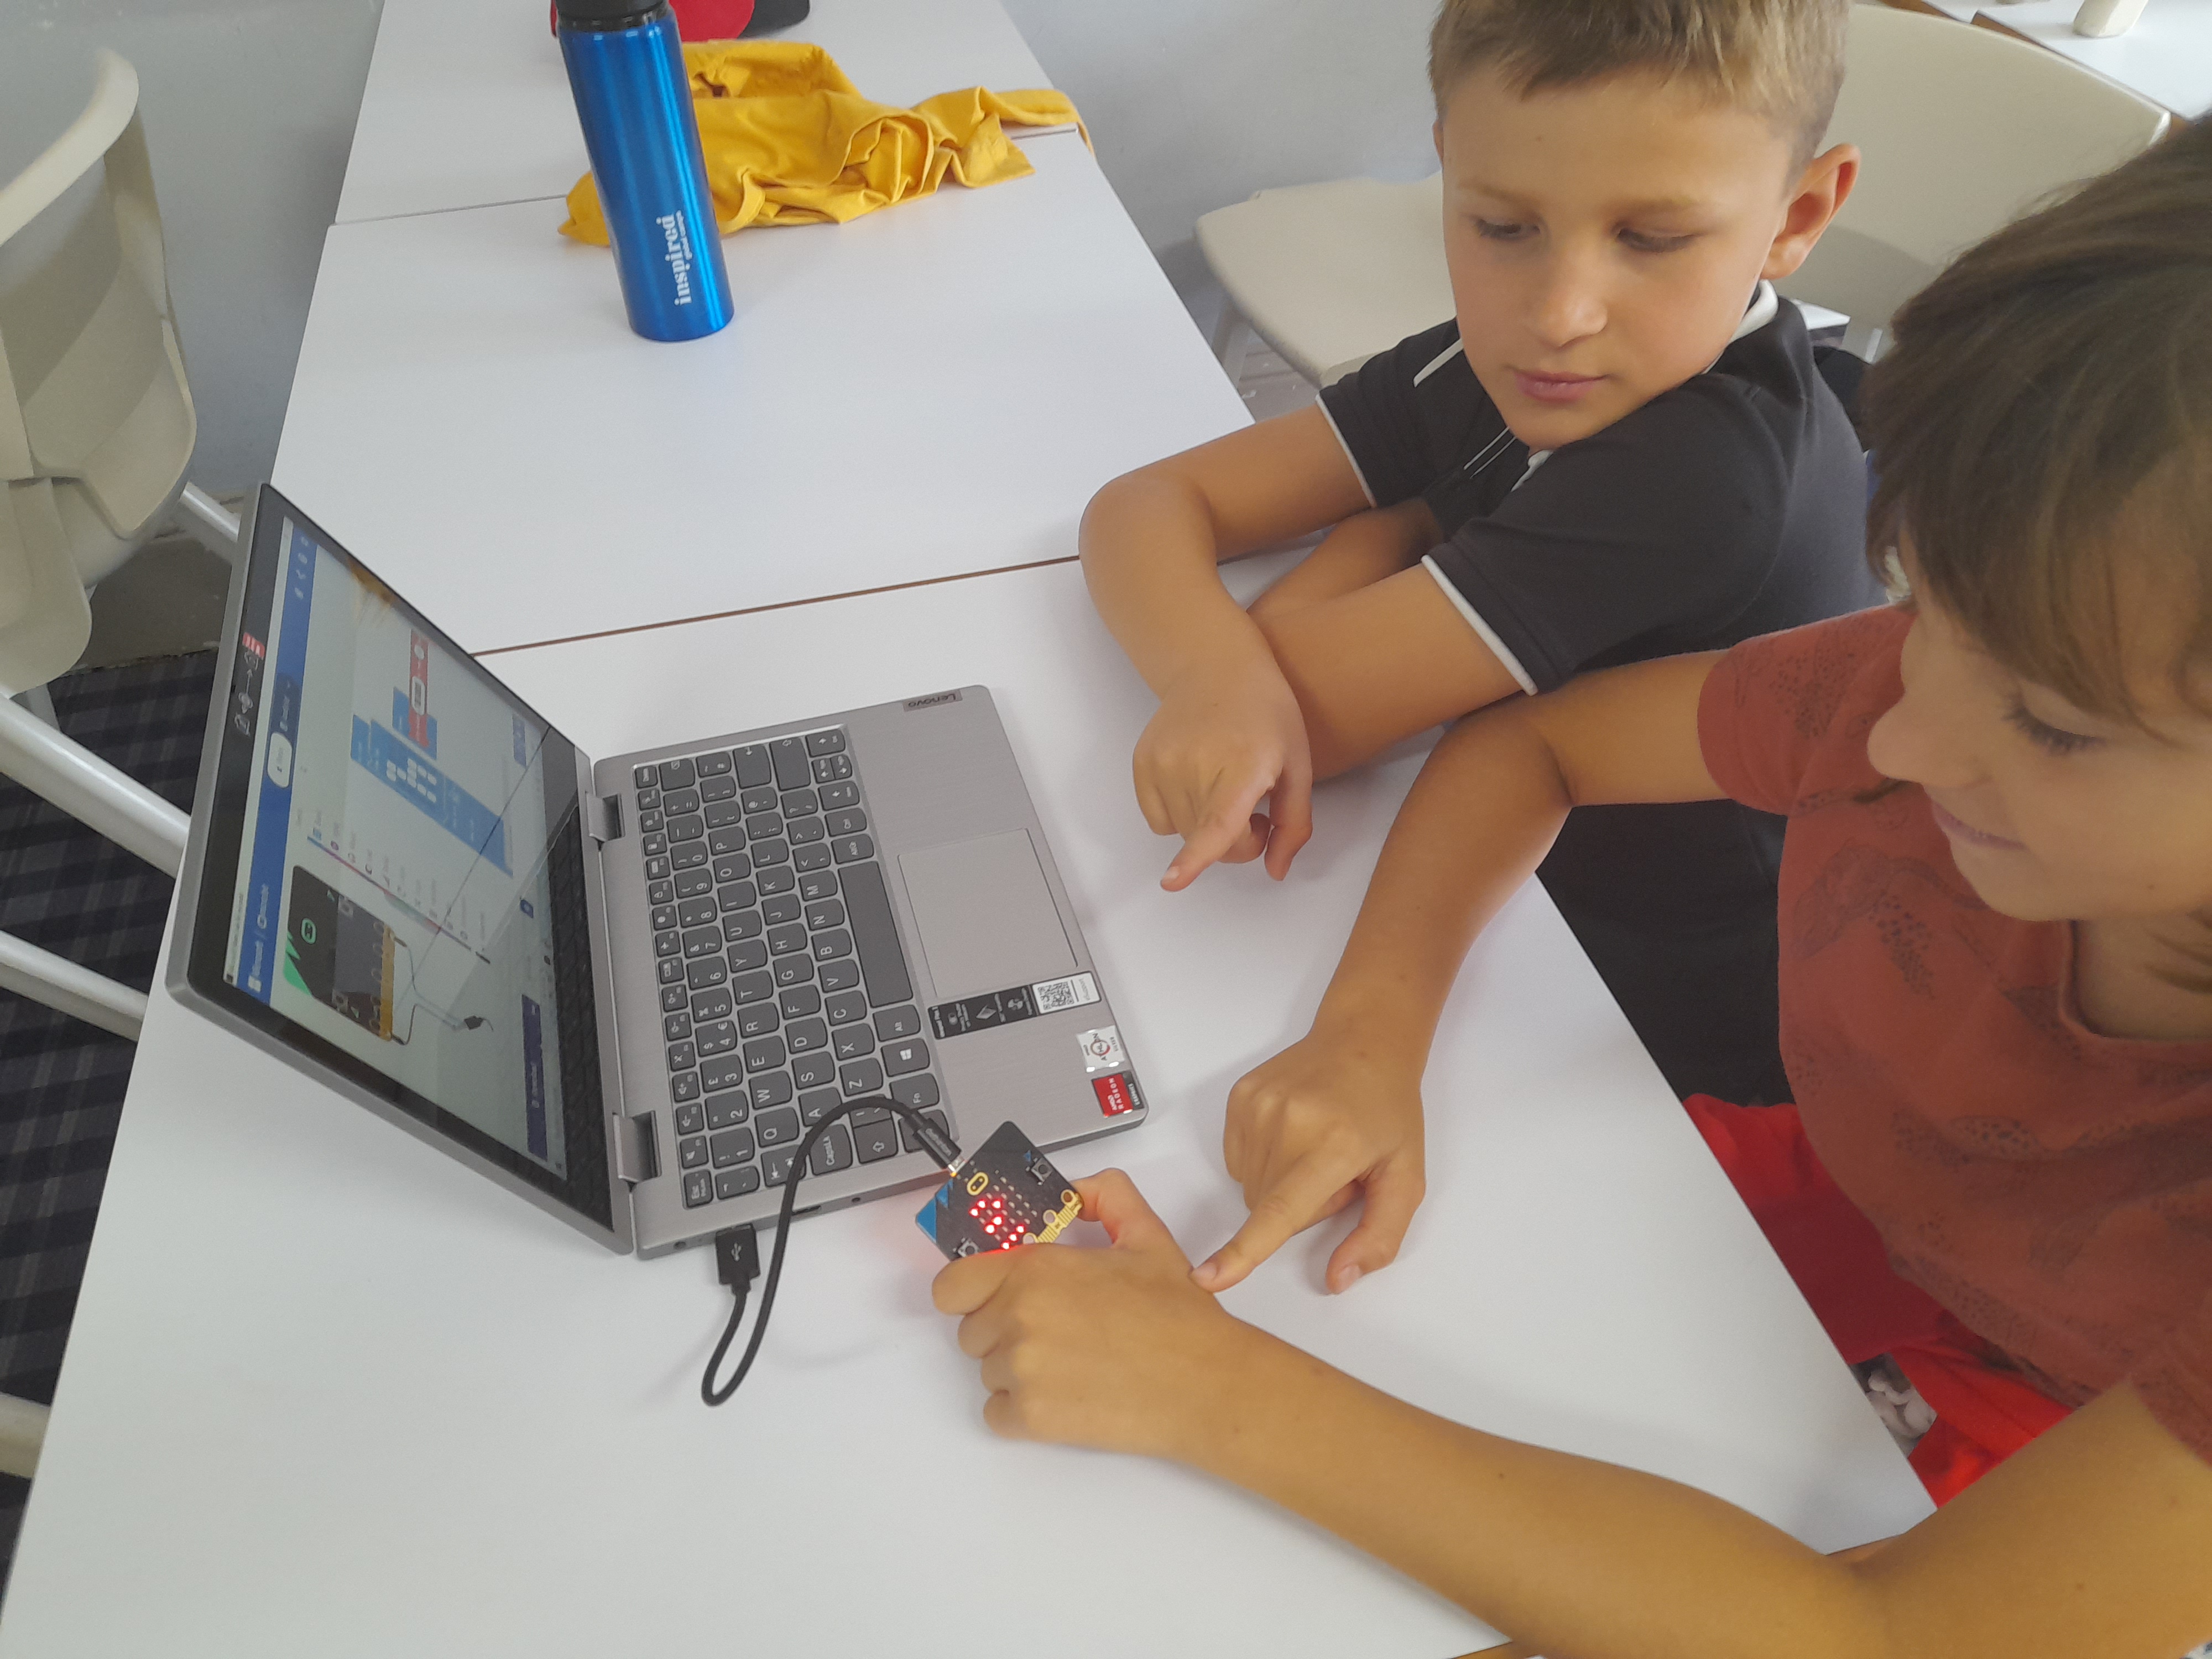 Children Programming with Microbit